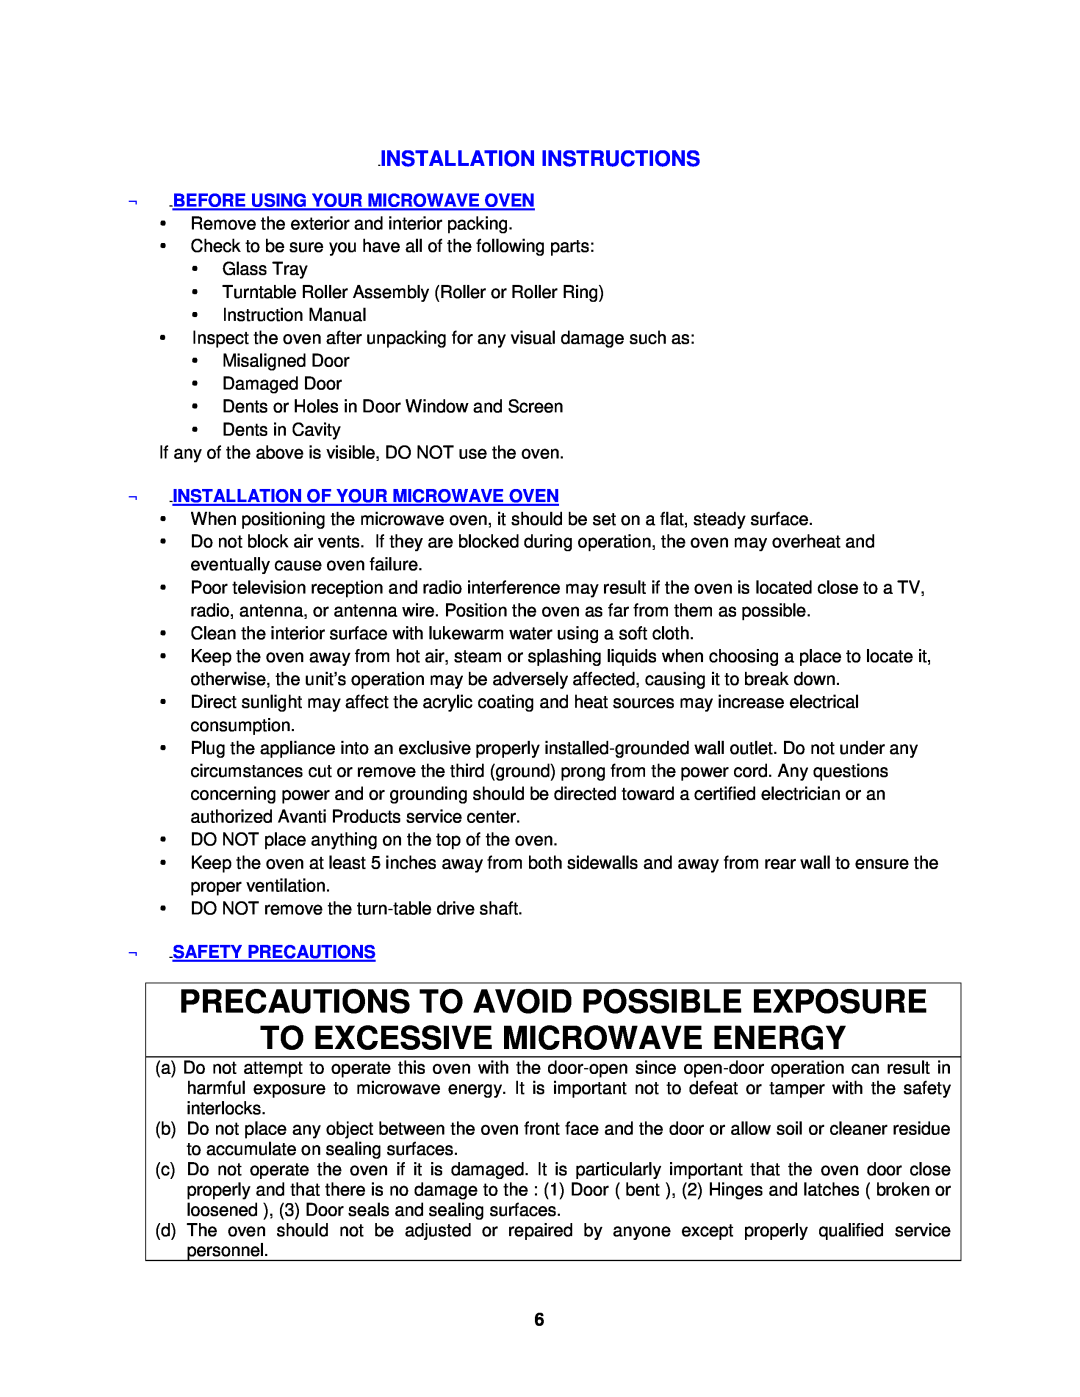 Avanti MO1450TW Precautions To Avoid Possible Exposure, To Excessive Microwave Energy, Installation Instructions 